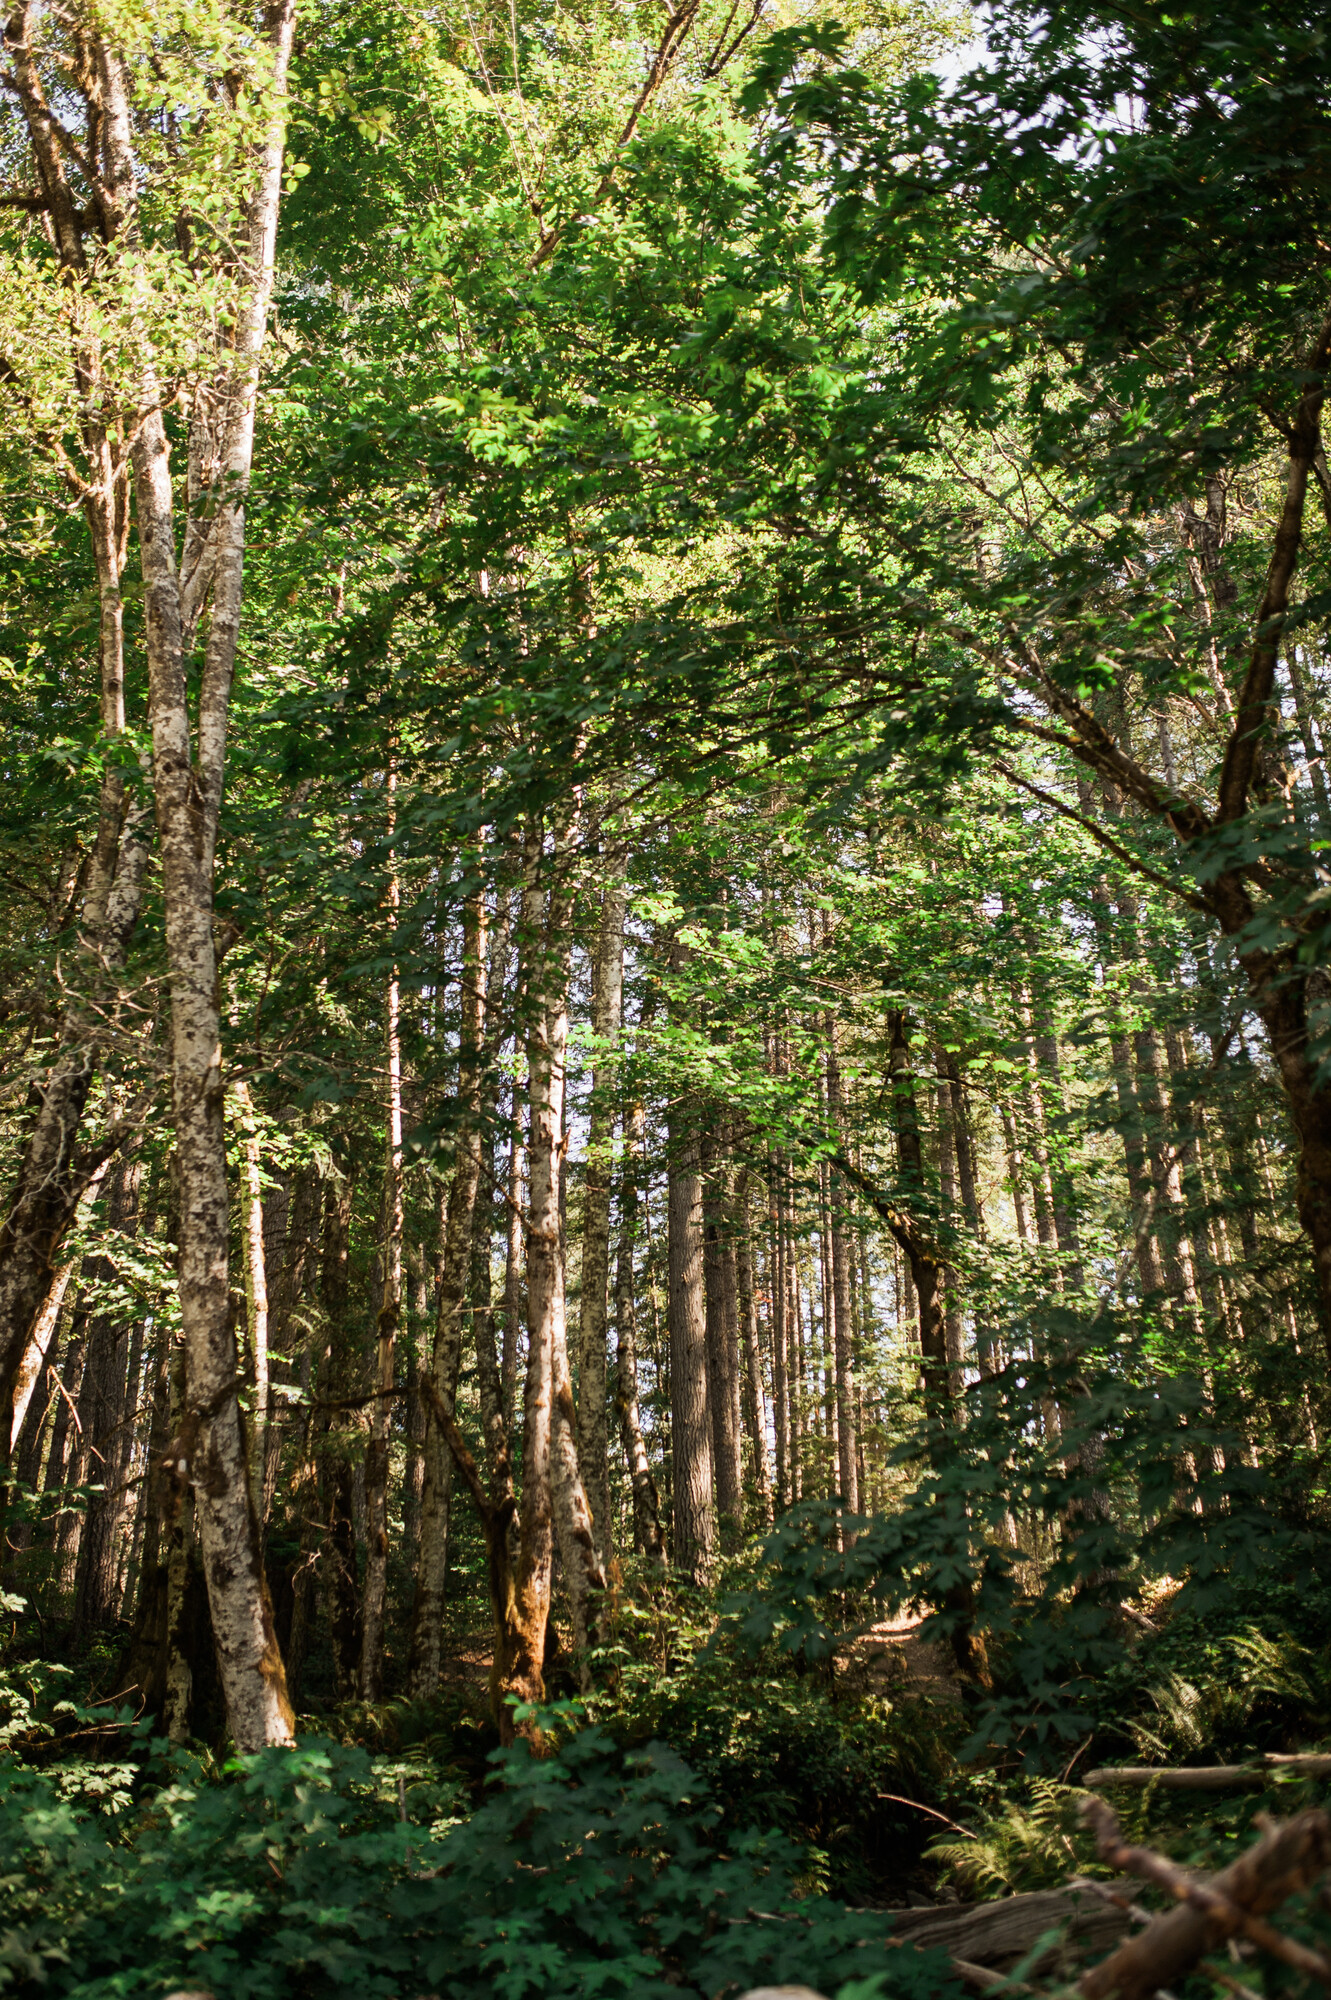 The dense forest in Chemainus River Park.